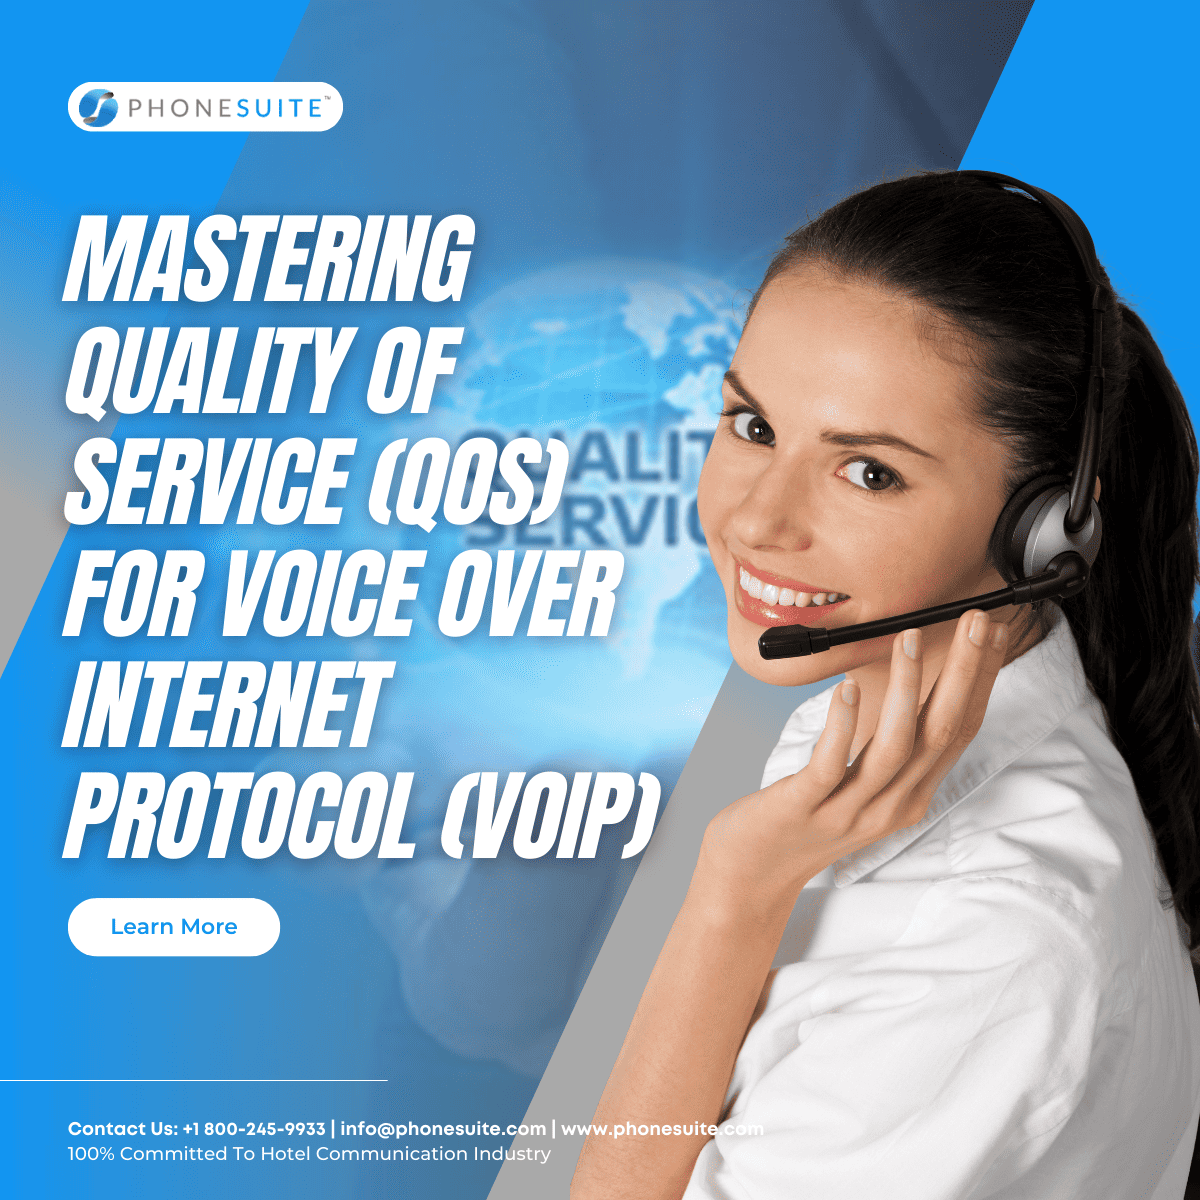 Mastering Quality of Service (QoS) for Voice over Internet Protocol (VoIP)